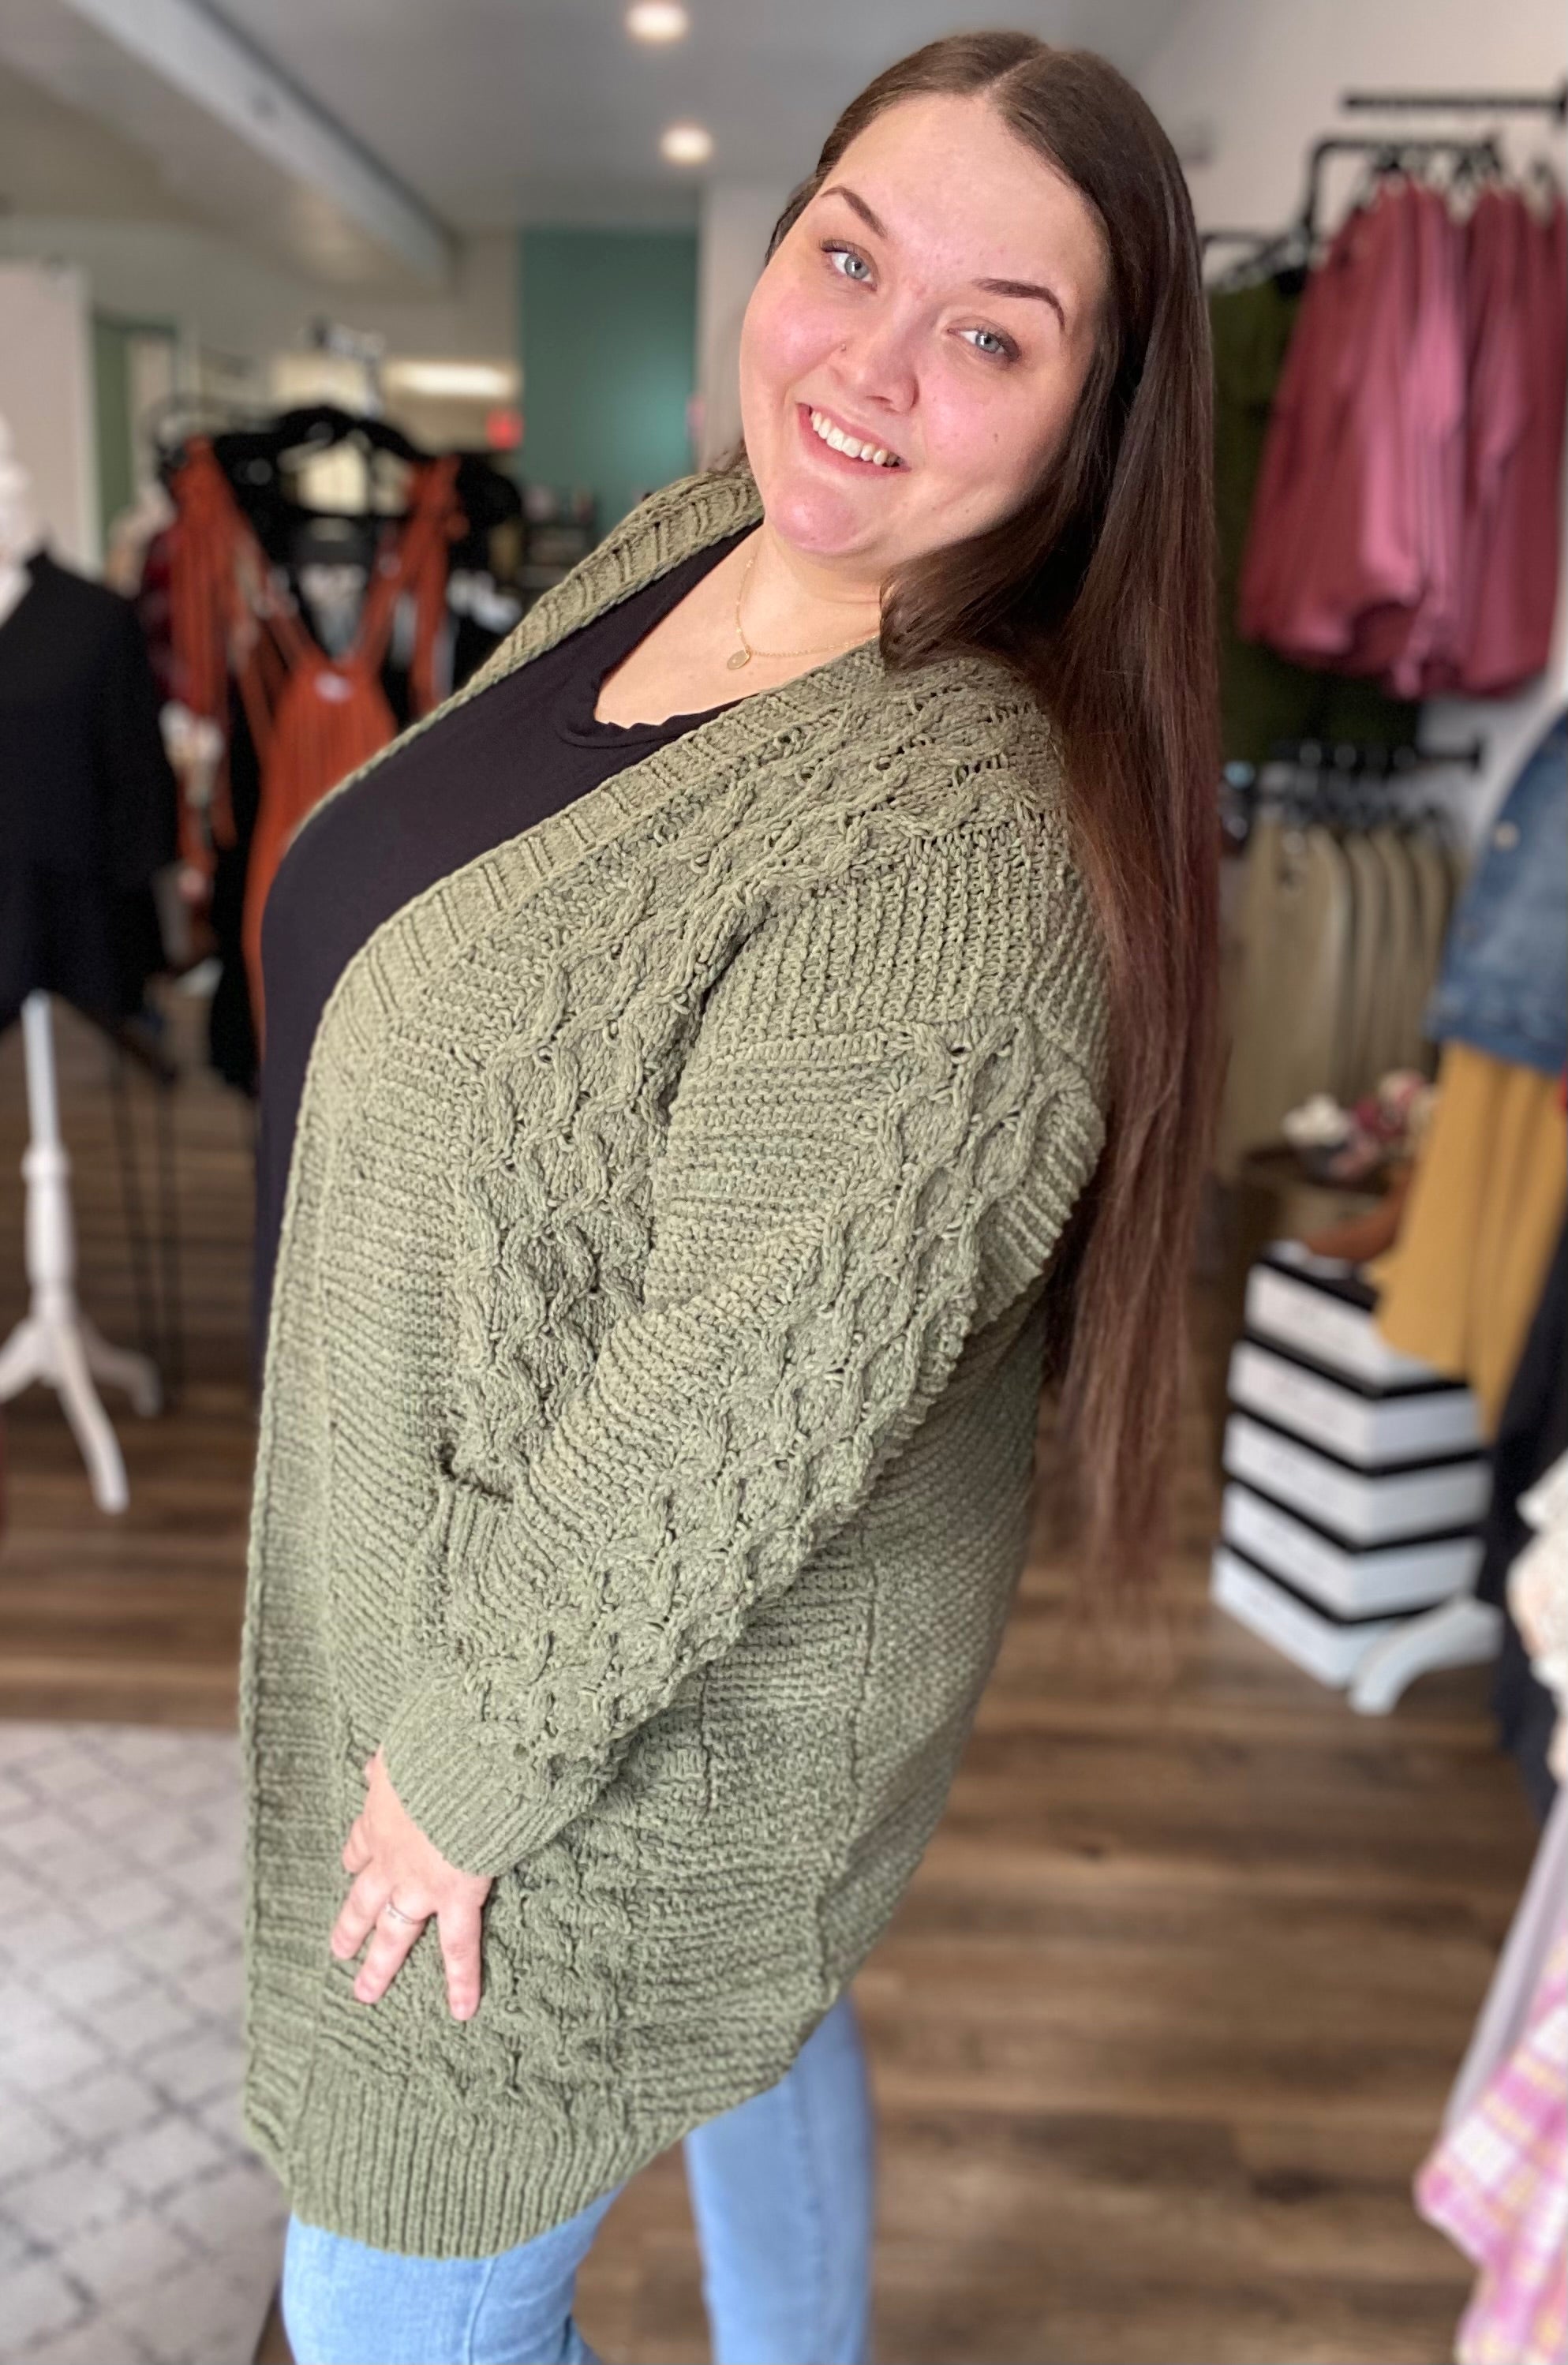 Shop Emma Cable Knit Cardigan - Olive-Cardigan at Ruby Joy Boutique, a Women's Clothing Store in Pickerington, Ohio